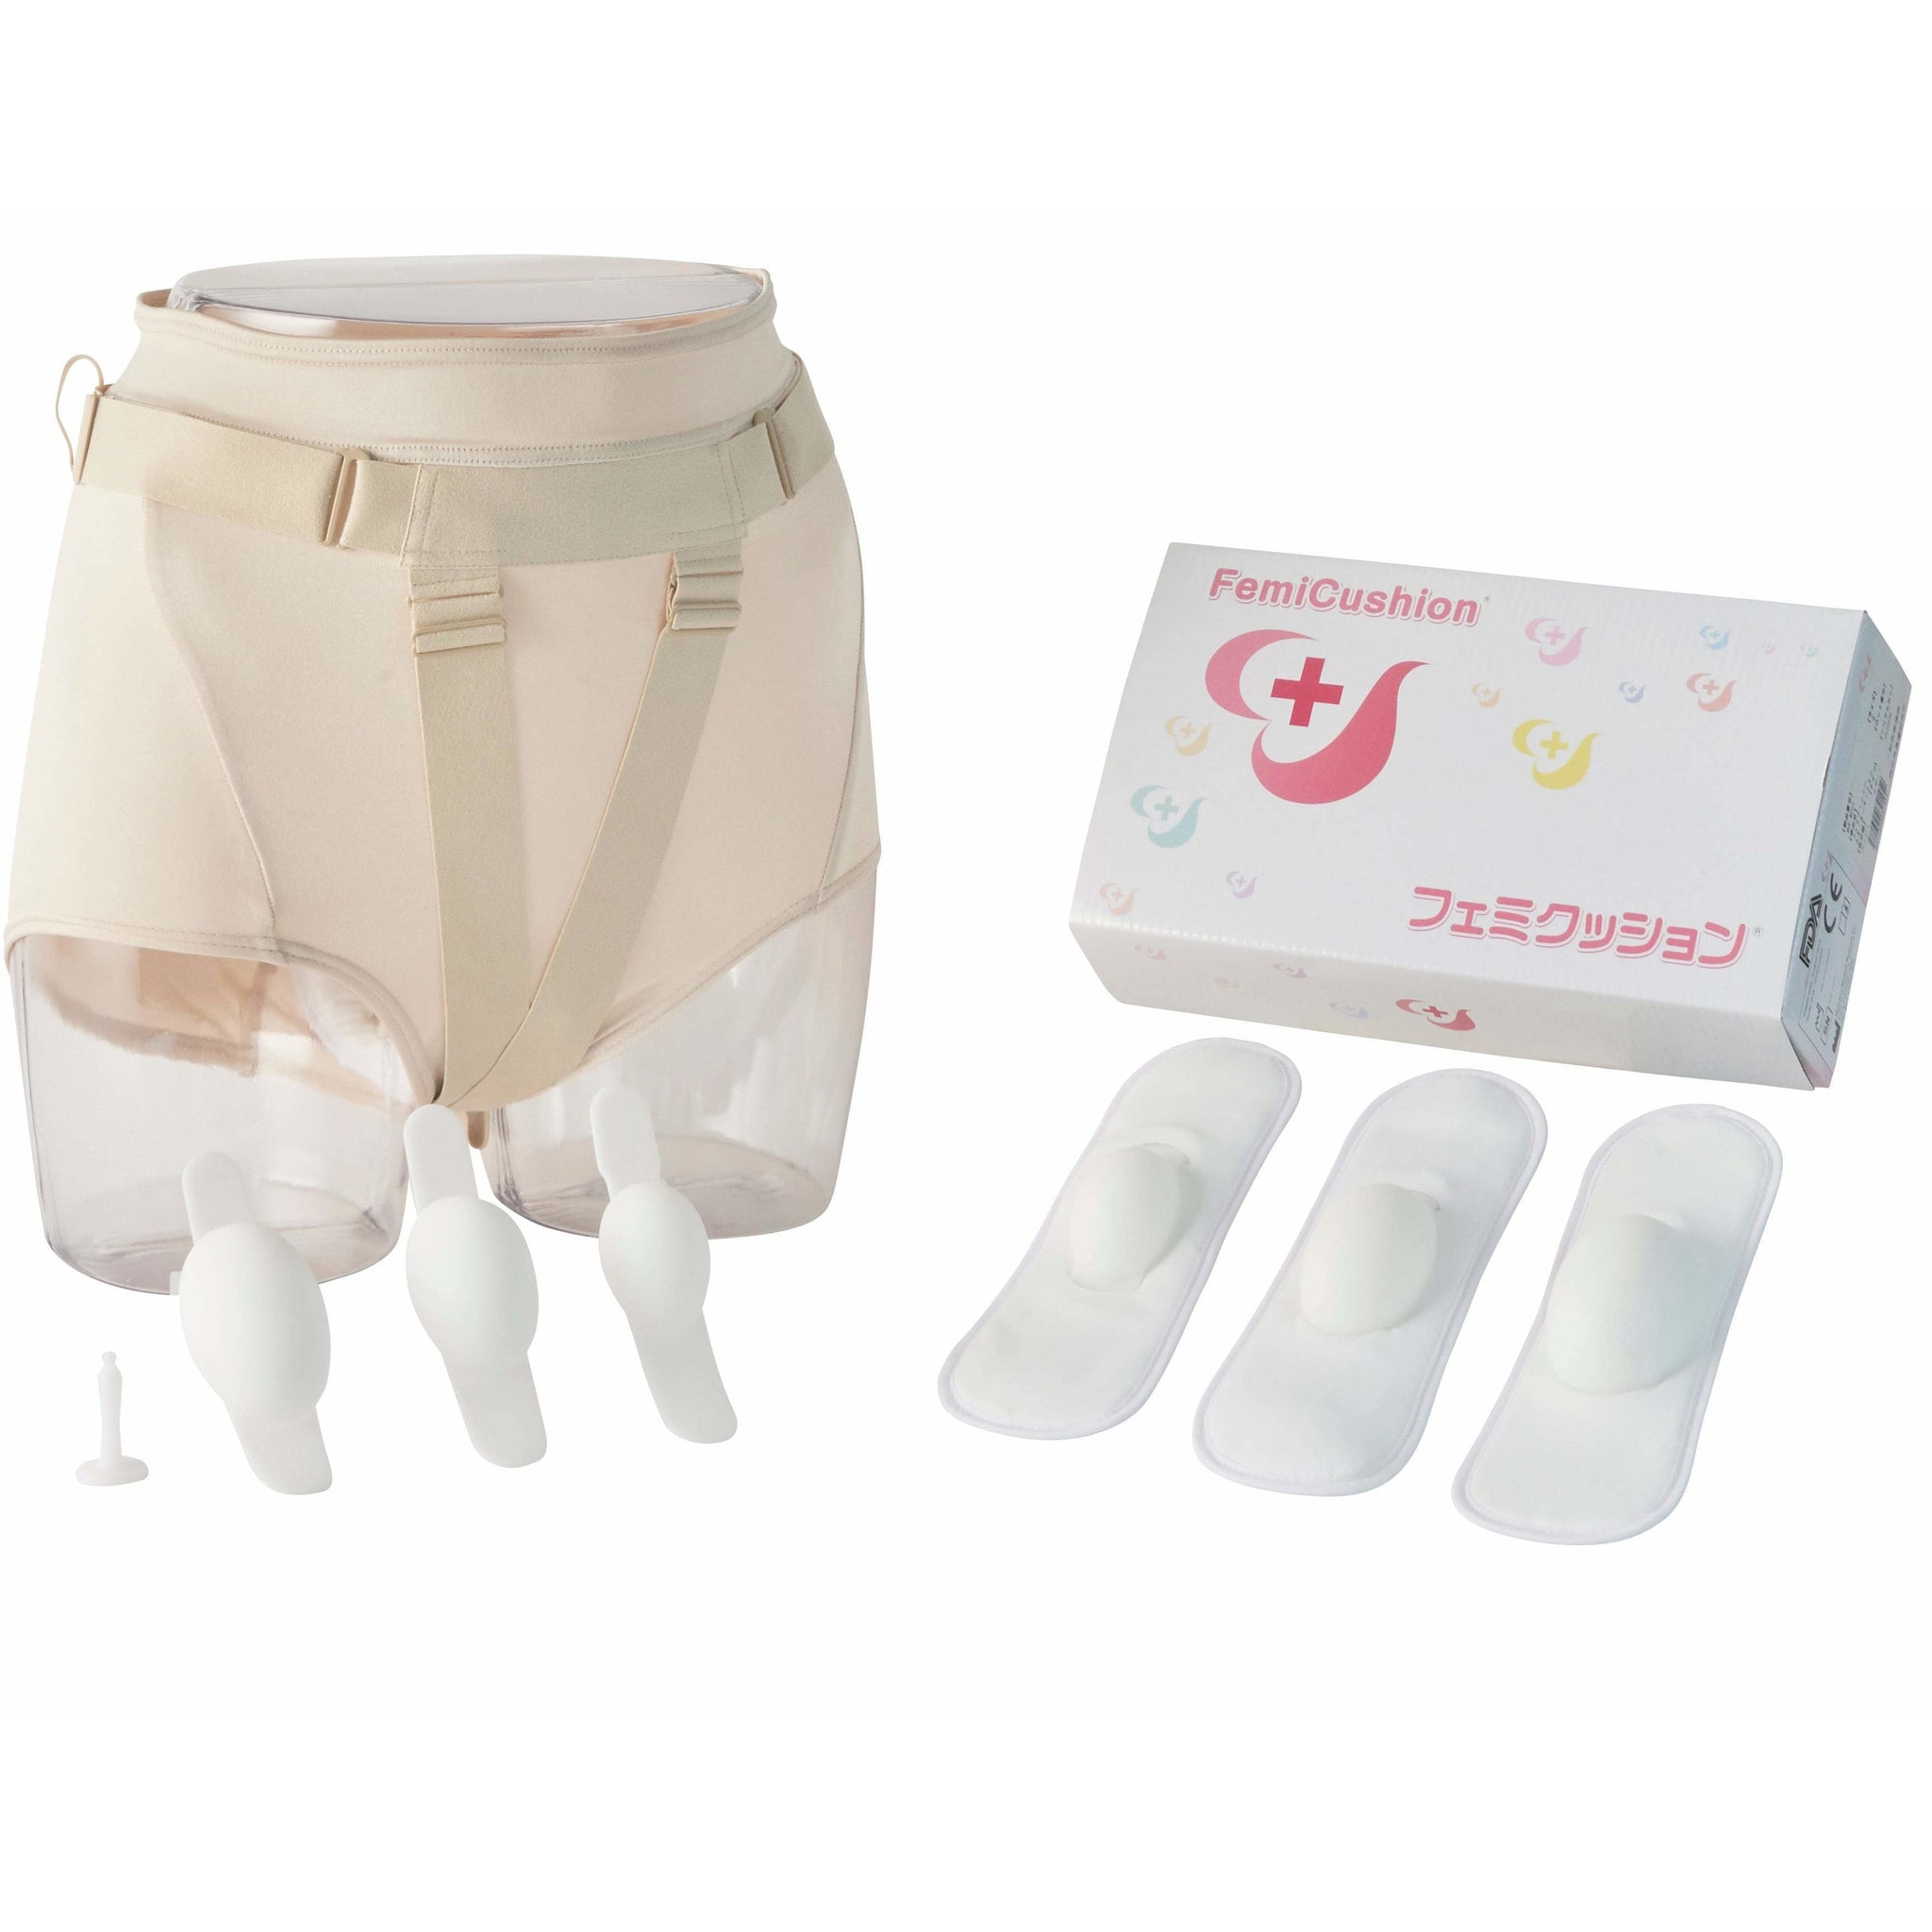 FemiCushion Standard Deluxe Kit - Prolapse Relief Without A Pessary